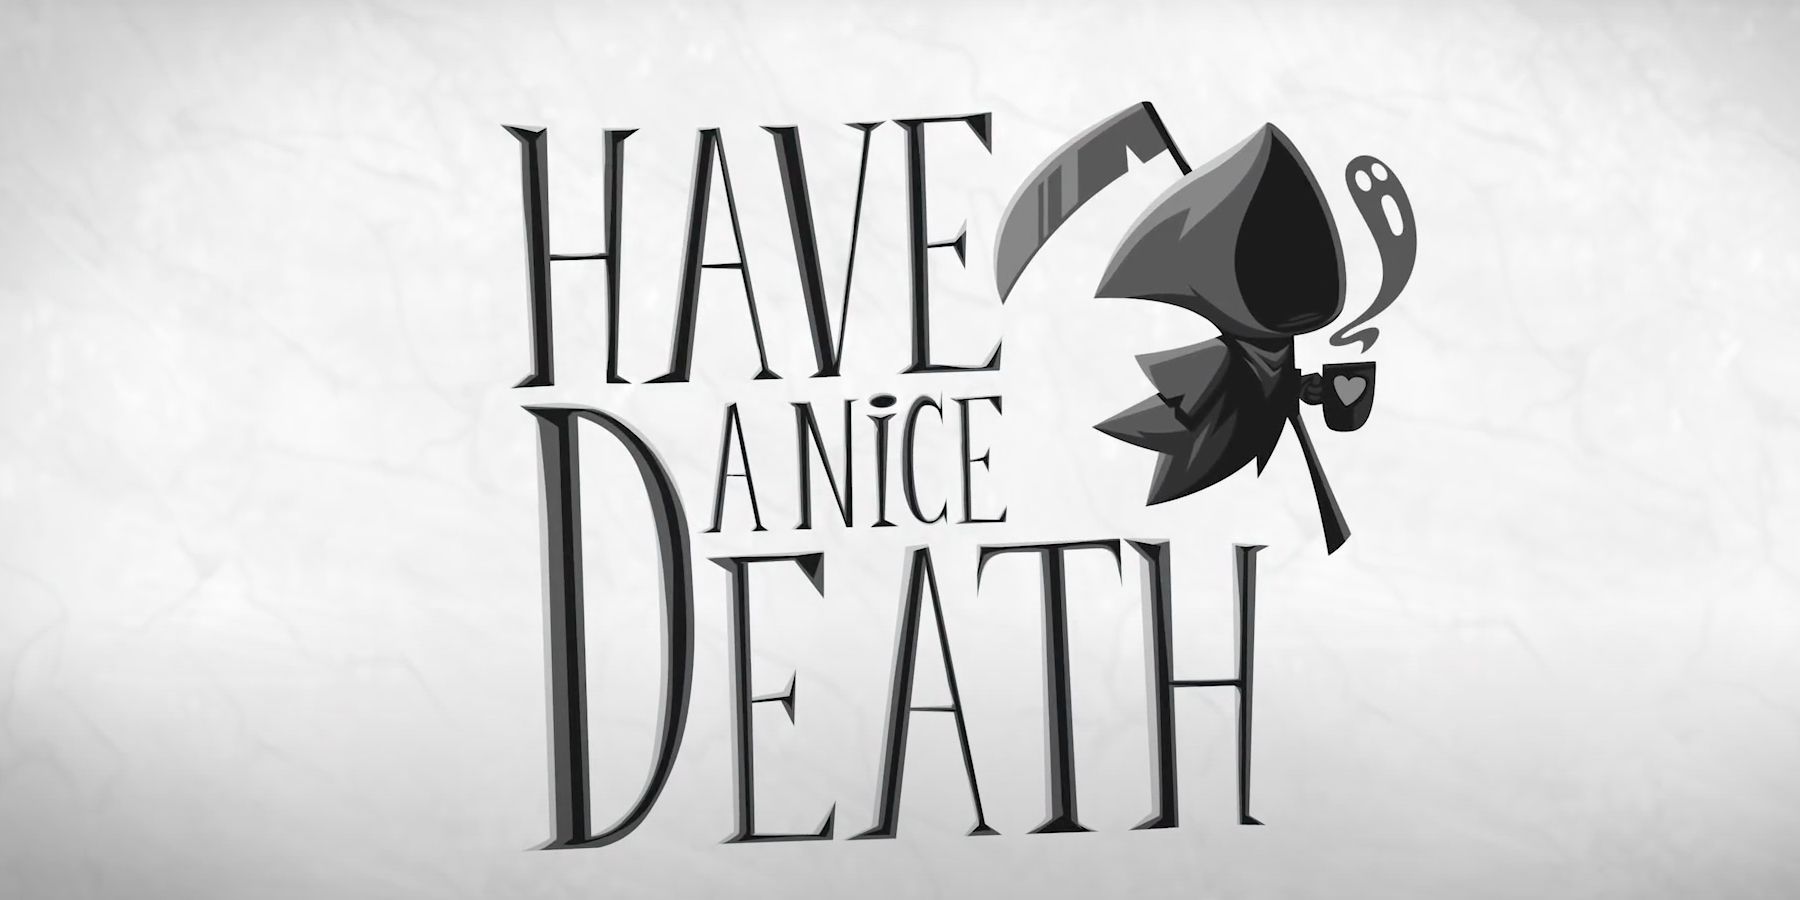 have a nice death cover image